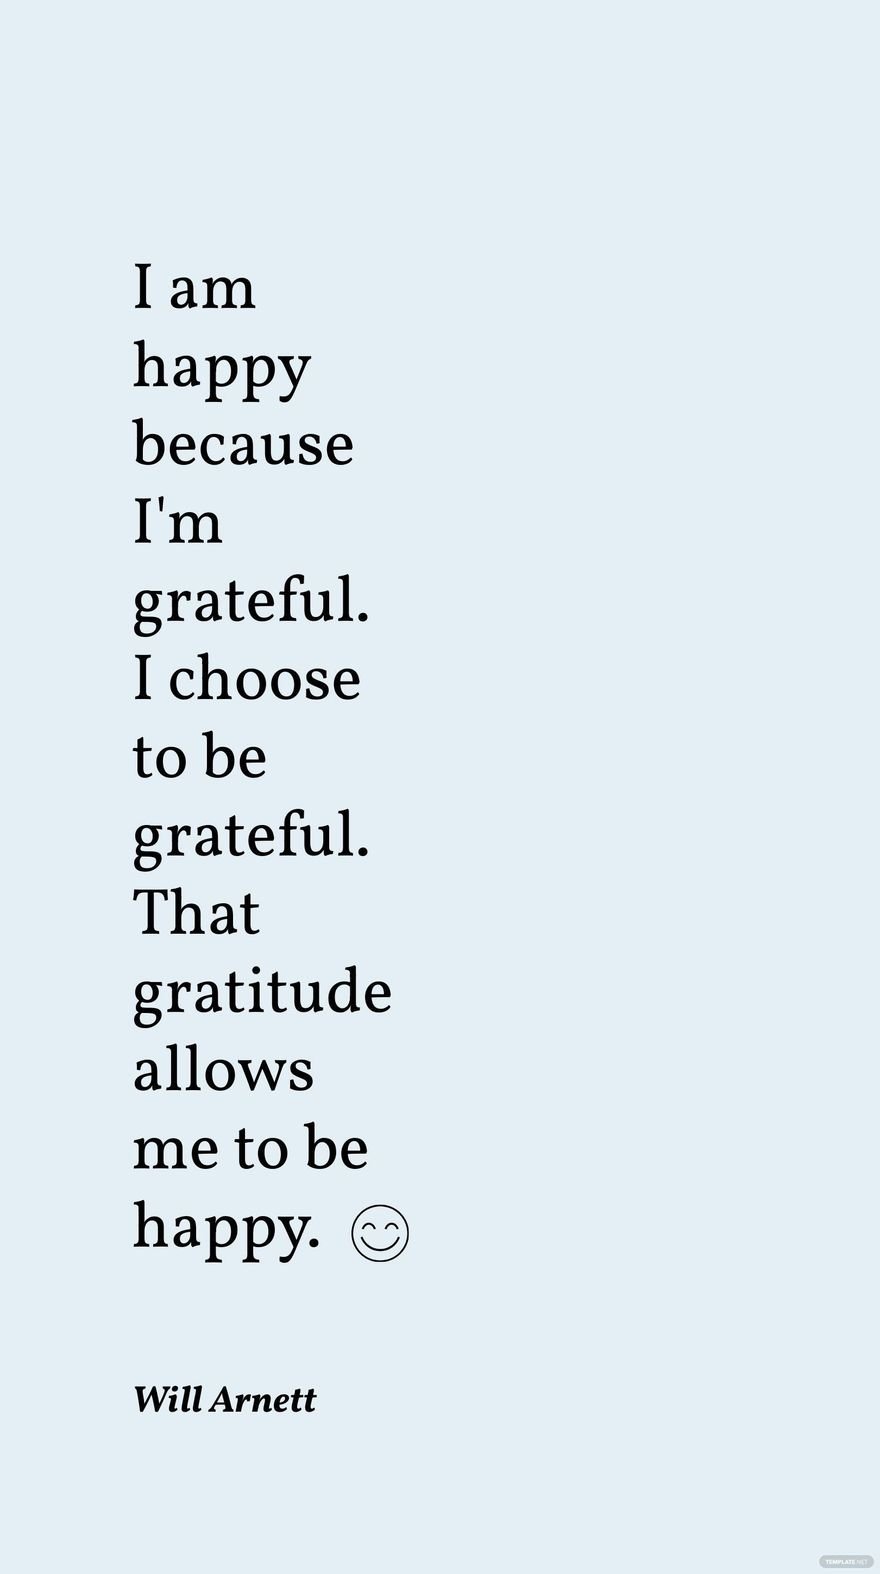 Free Will Arnett - I am happy because I'm grateful. I choose to be grateful. That gratitude allows me to be happy. in JPG